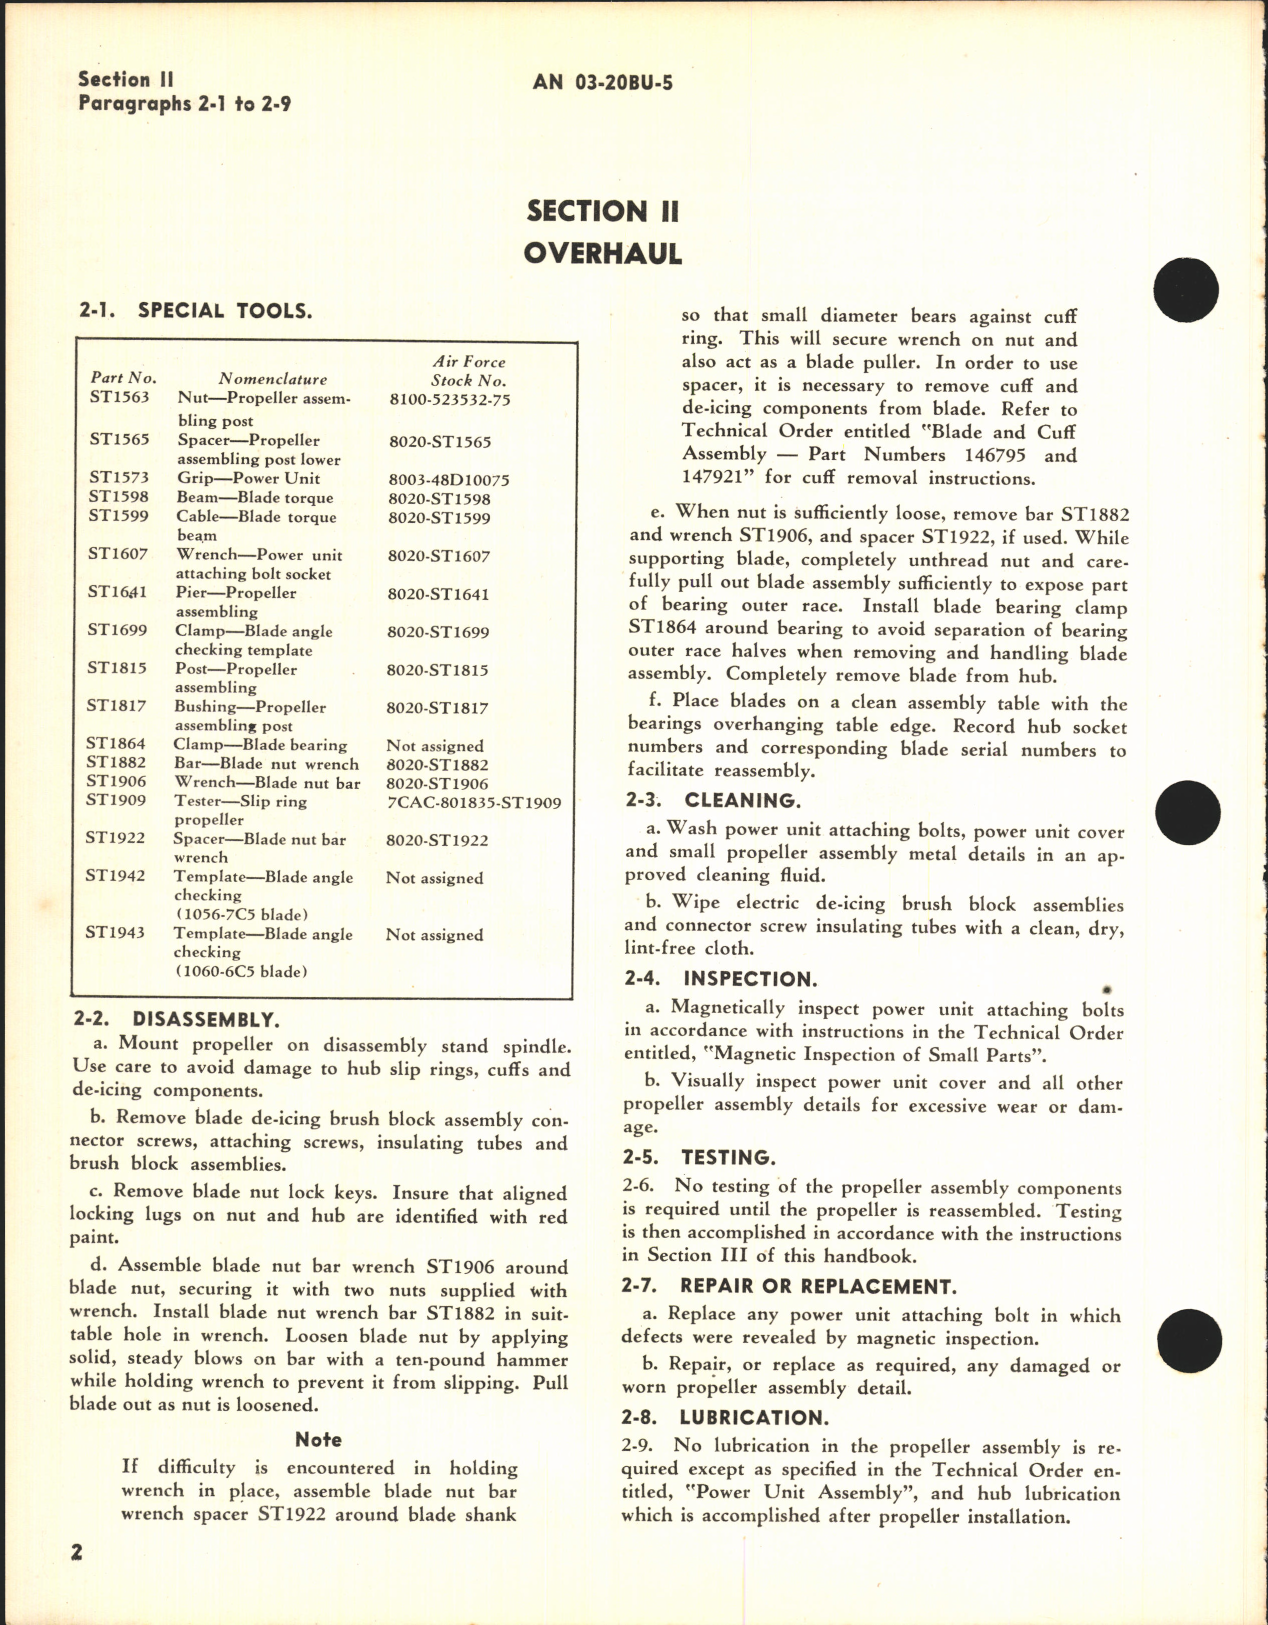 Sample page 6 from AirCorps Library document: Overhaul Instructions for Curtiss Propeller Assembly Models C735S-A2 and C735S-A4